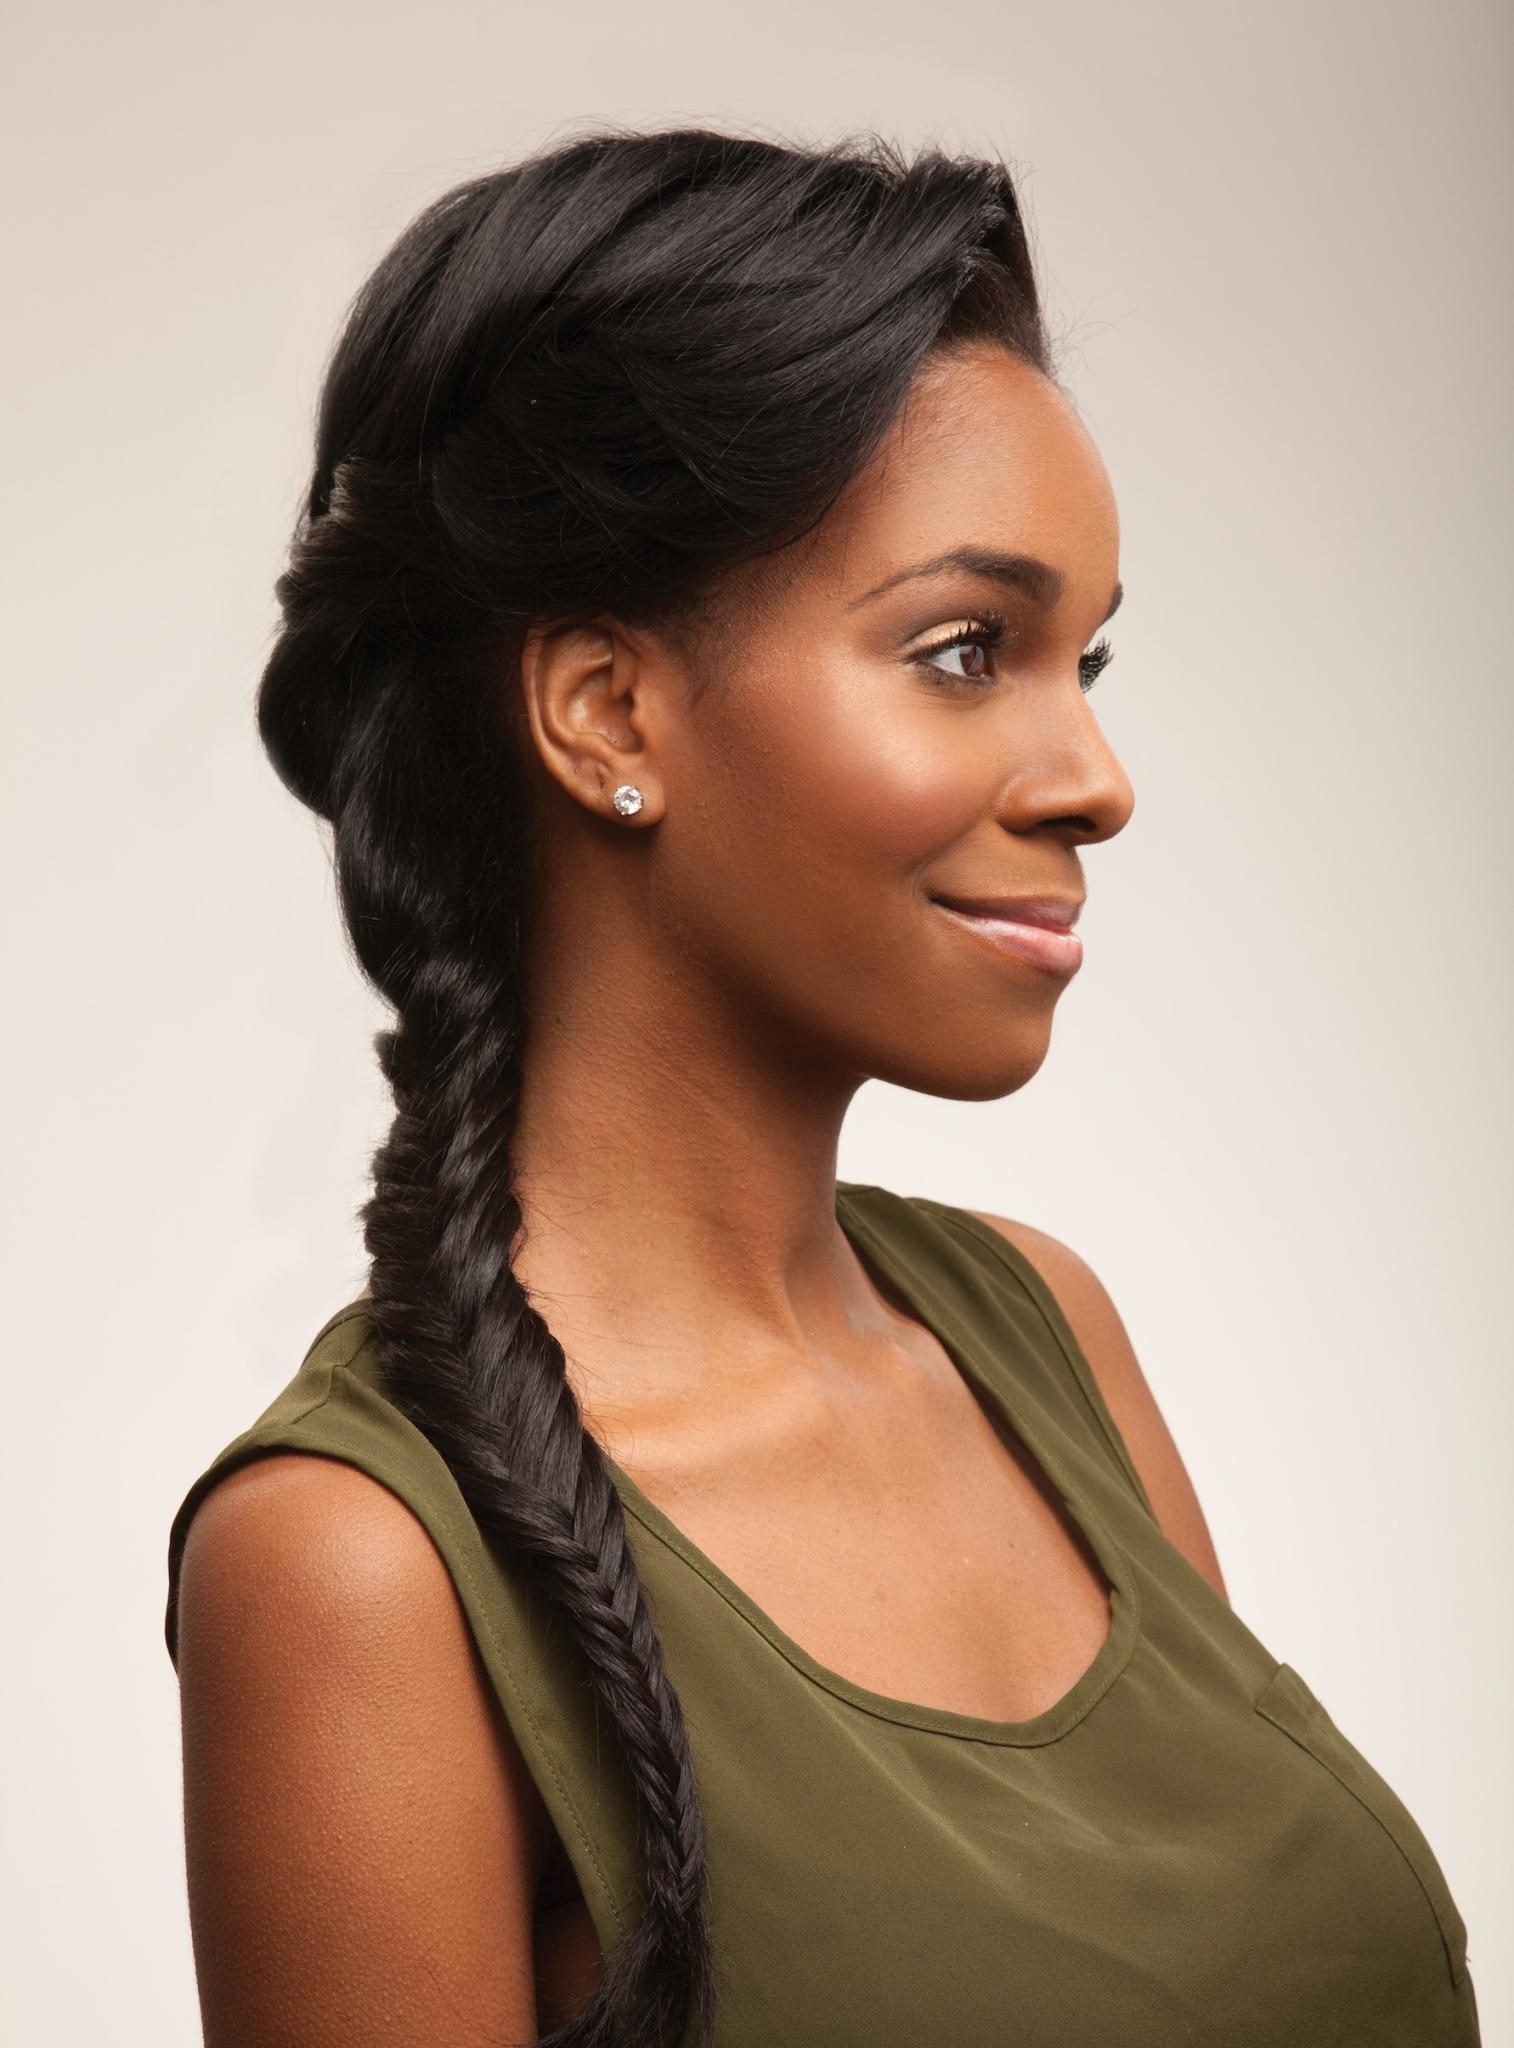 Getting Married? Try These Braids For The Big Day